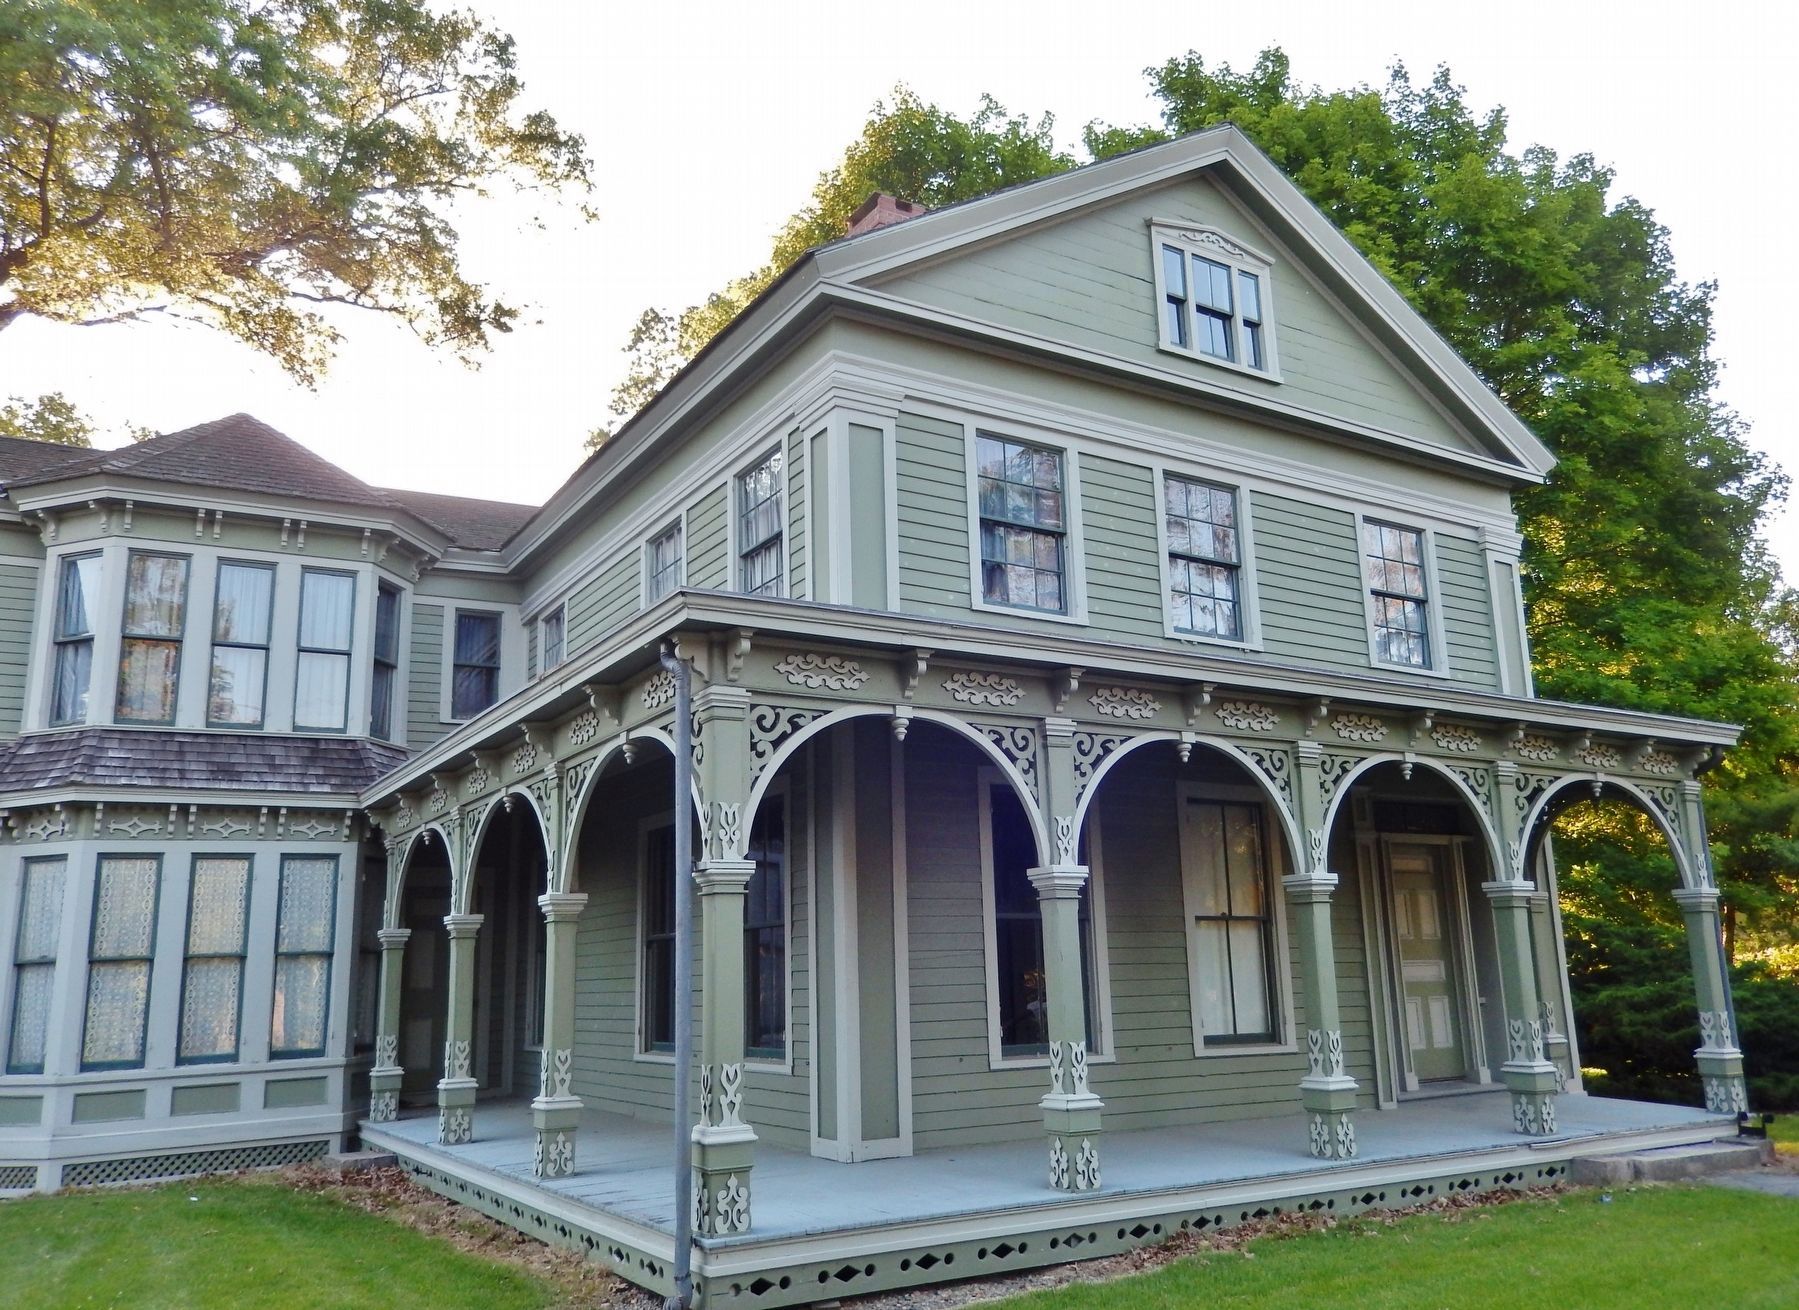 George Greenman House (<i>porch and ornate decorations added in the 1870s</i>) image. Click for full size.